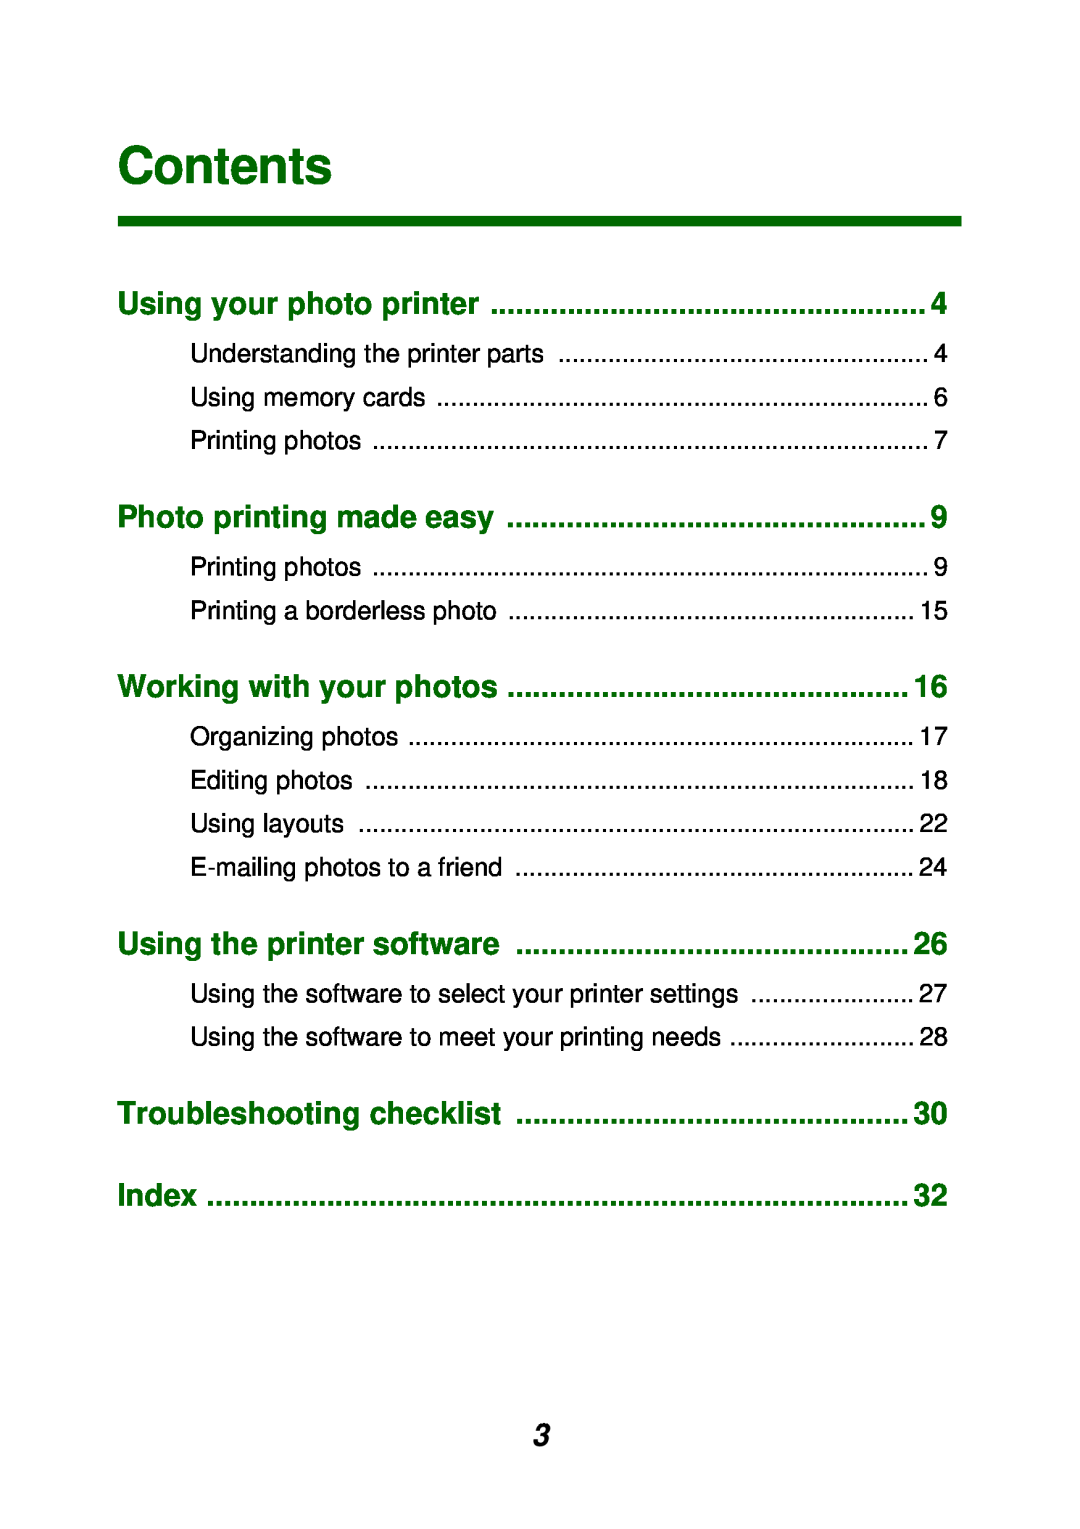 Lexmark P700 manual Contents, Using your photo printer, Photo printing made easy, Working with your photos, Index 